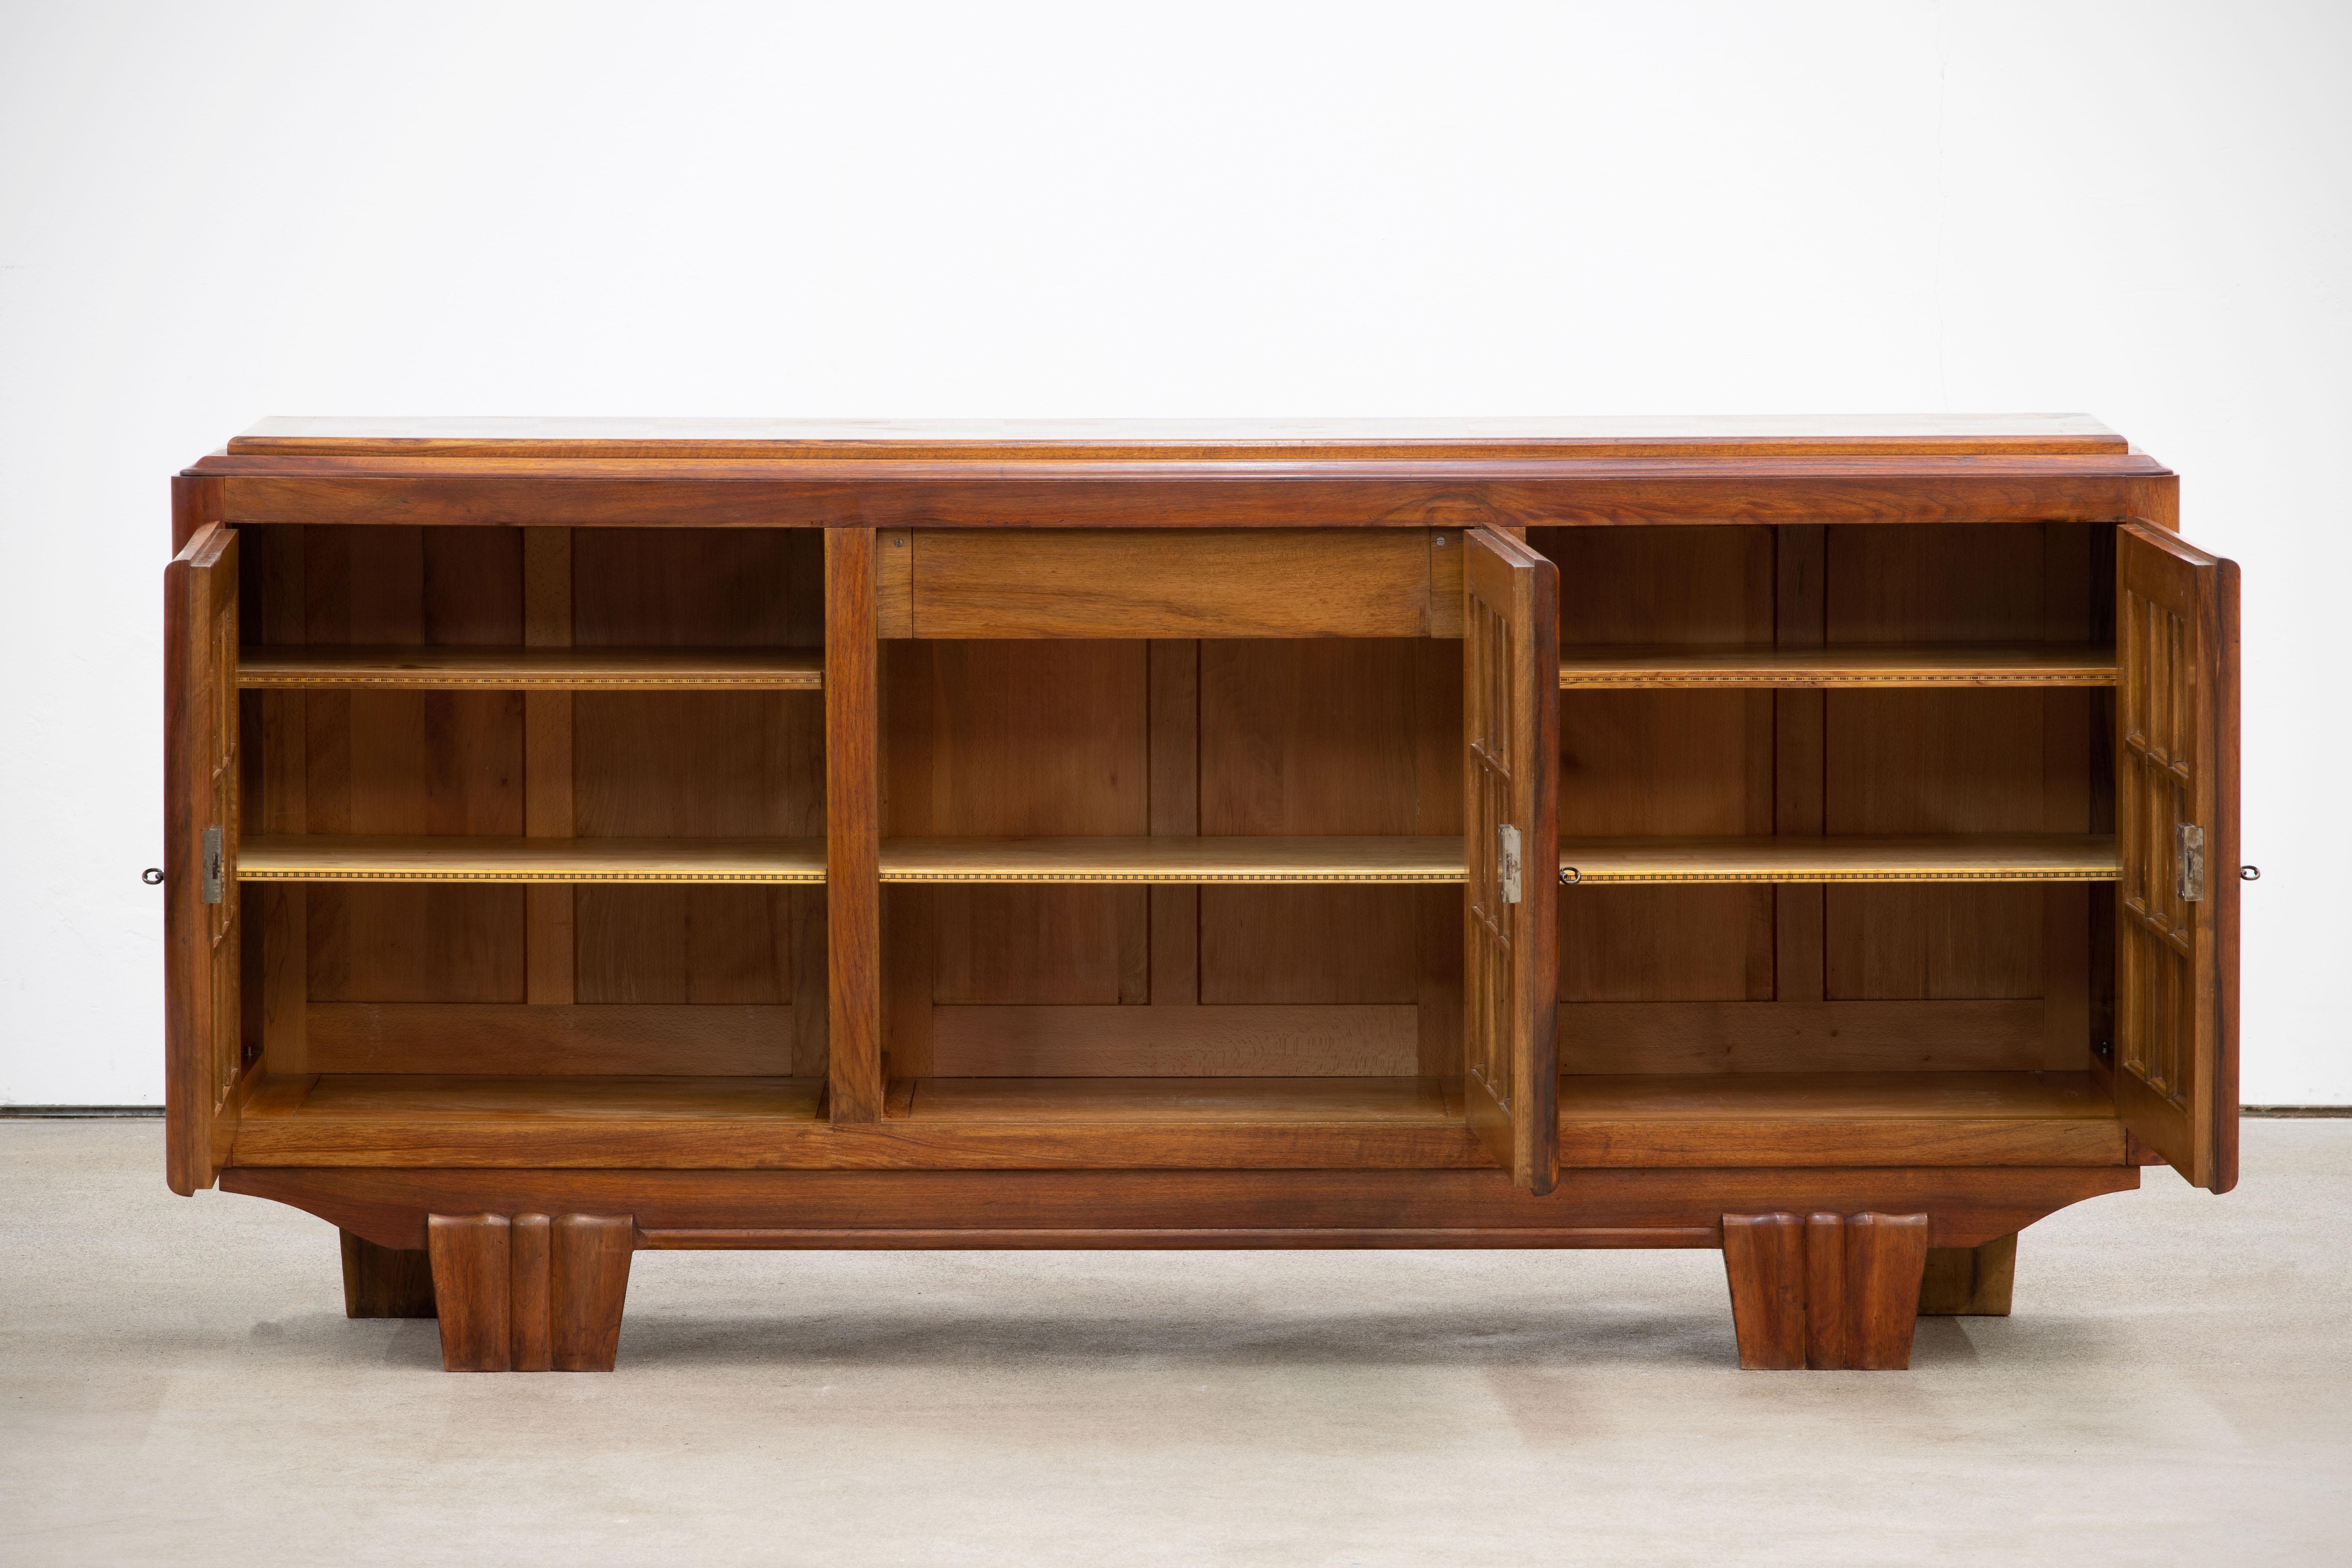 Credenza, solid oak, France, 1940s.
Large Art Deco Brutalist sideboard. This heavy Brutalist credenza seems to float on its elegant base. The credenza consists of three large storage facilities and covered with very detailed designed door panels.